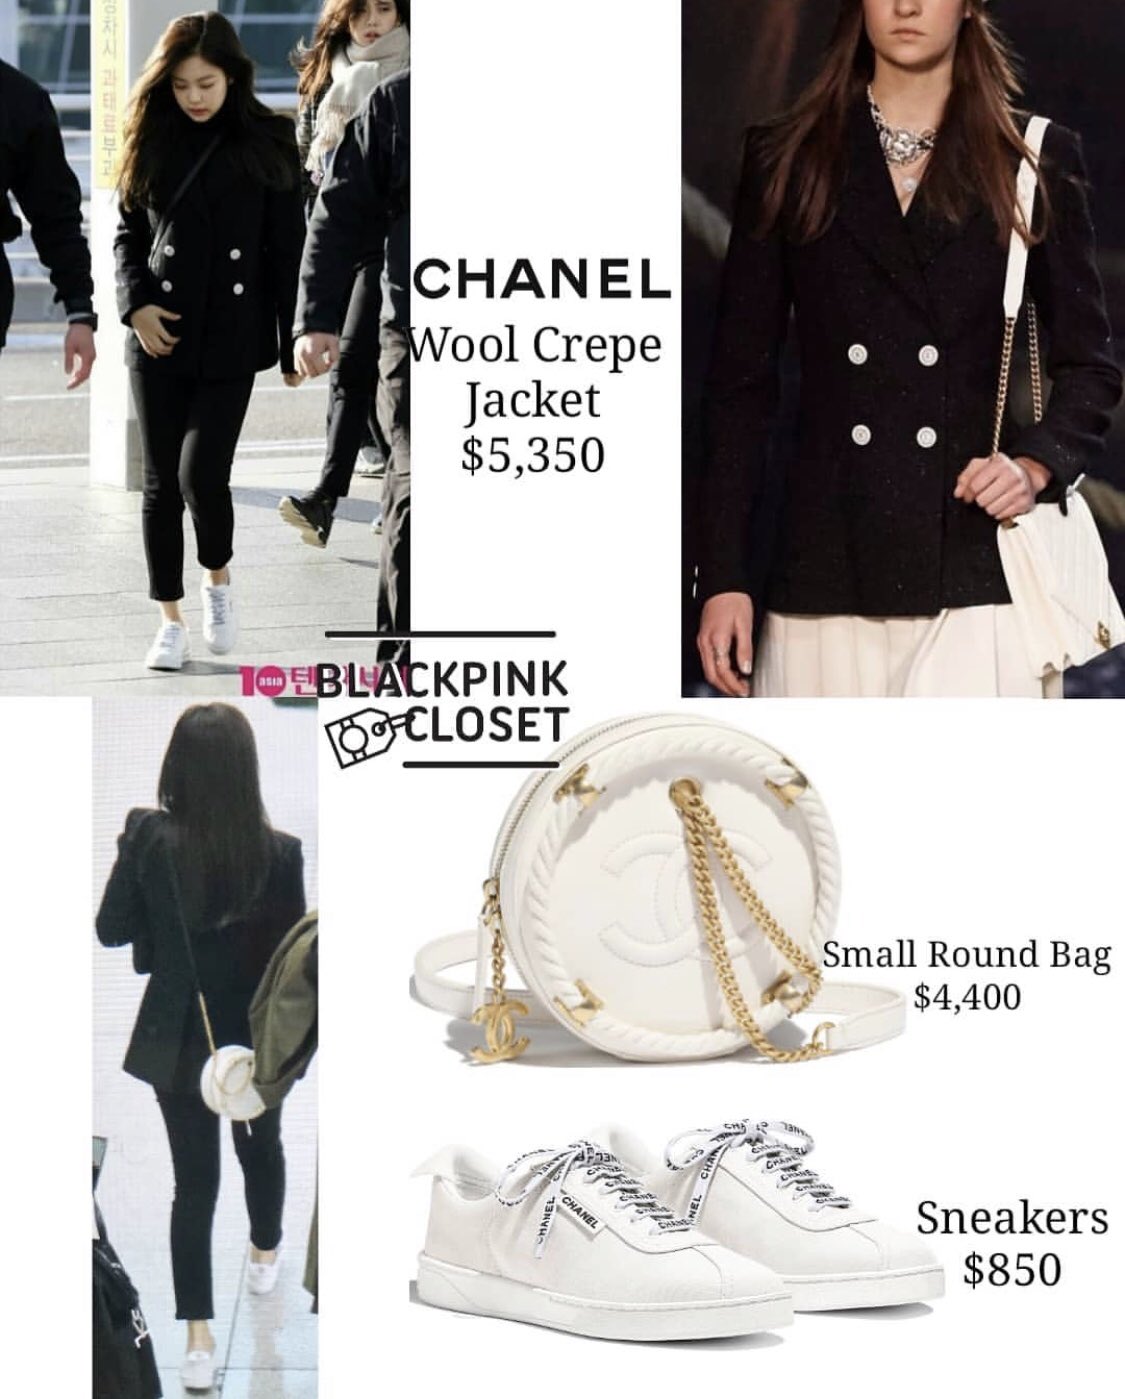 JENNIEKIMJENNIE on X: Guess what the total costs of Jennie's head to  toe @CHANEL airport fashion at the airport today costs $10,600 USD!!!  OMG!!! $10,600 USD!!! 😱😱😱😱😱😱 But the Chanel sneakers looks